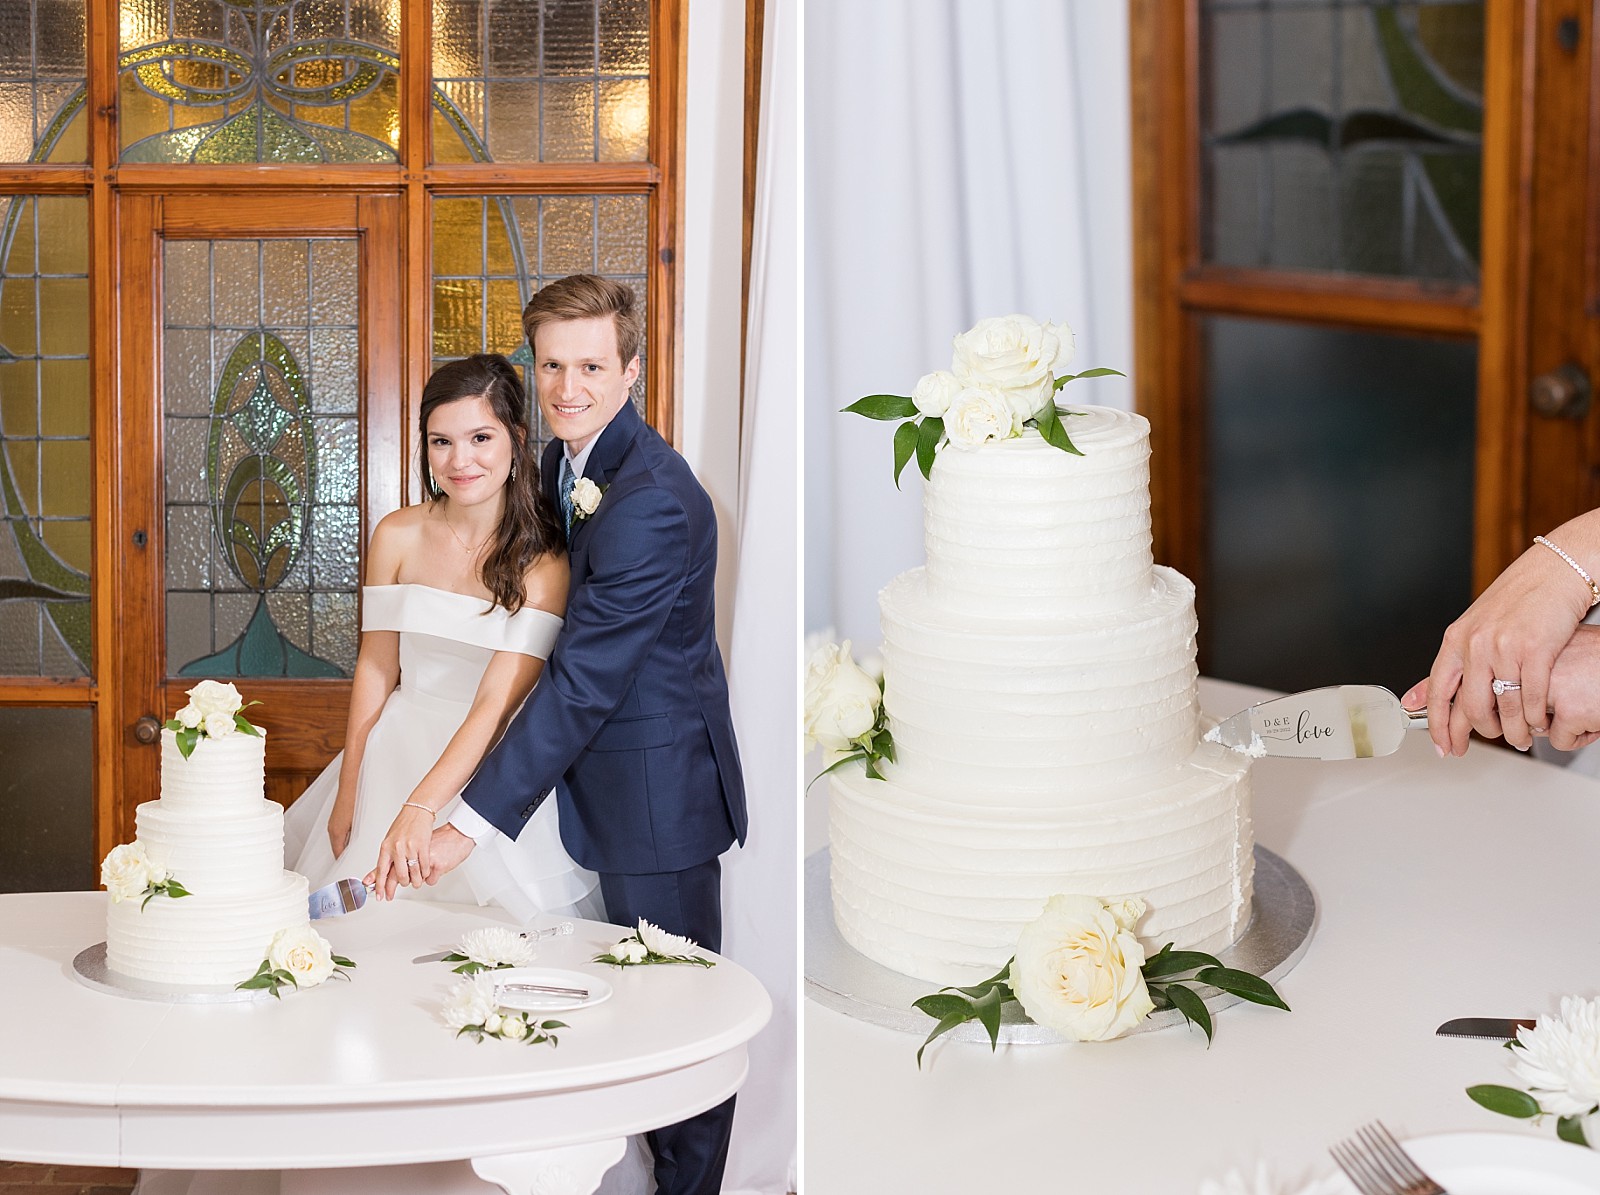 Bride and groom cutting their cake and details of cake cutter  | The Meadows in Raleigh | Raleigh NC Wedding Photographer